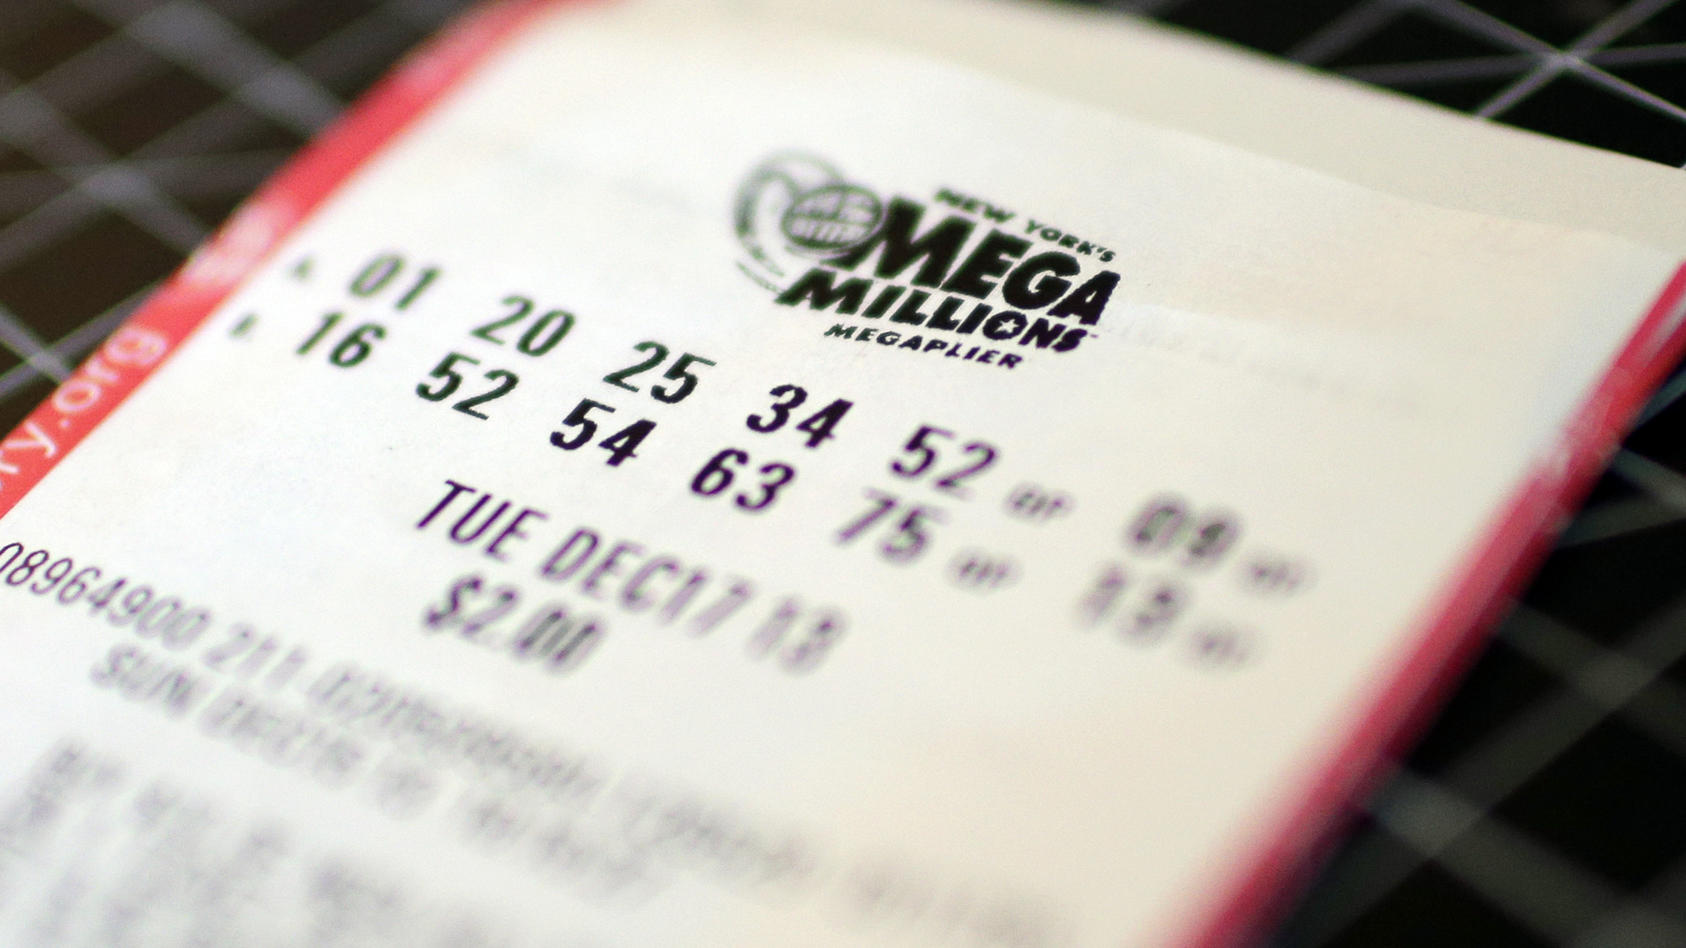 Image #: 26078533    Two Mega Millions tickets for the Tuesday December 17th jackpot lay one on top of the other In New York City on December 16, 2013. The Mega Millions jackpot has been boosted to $586 million, a jump from the earlier projection but